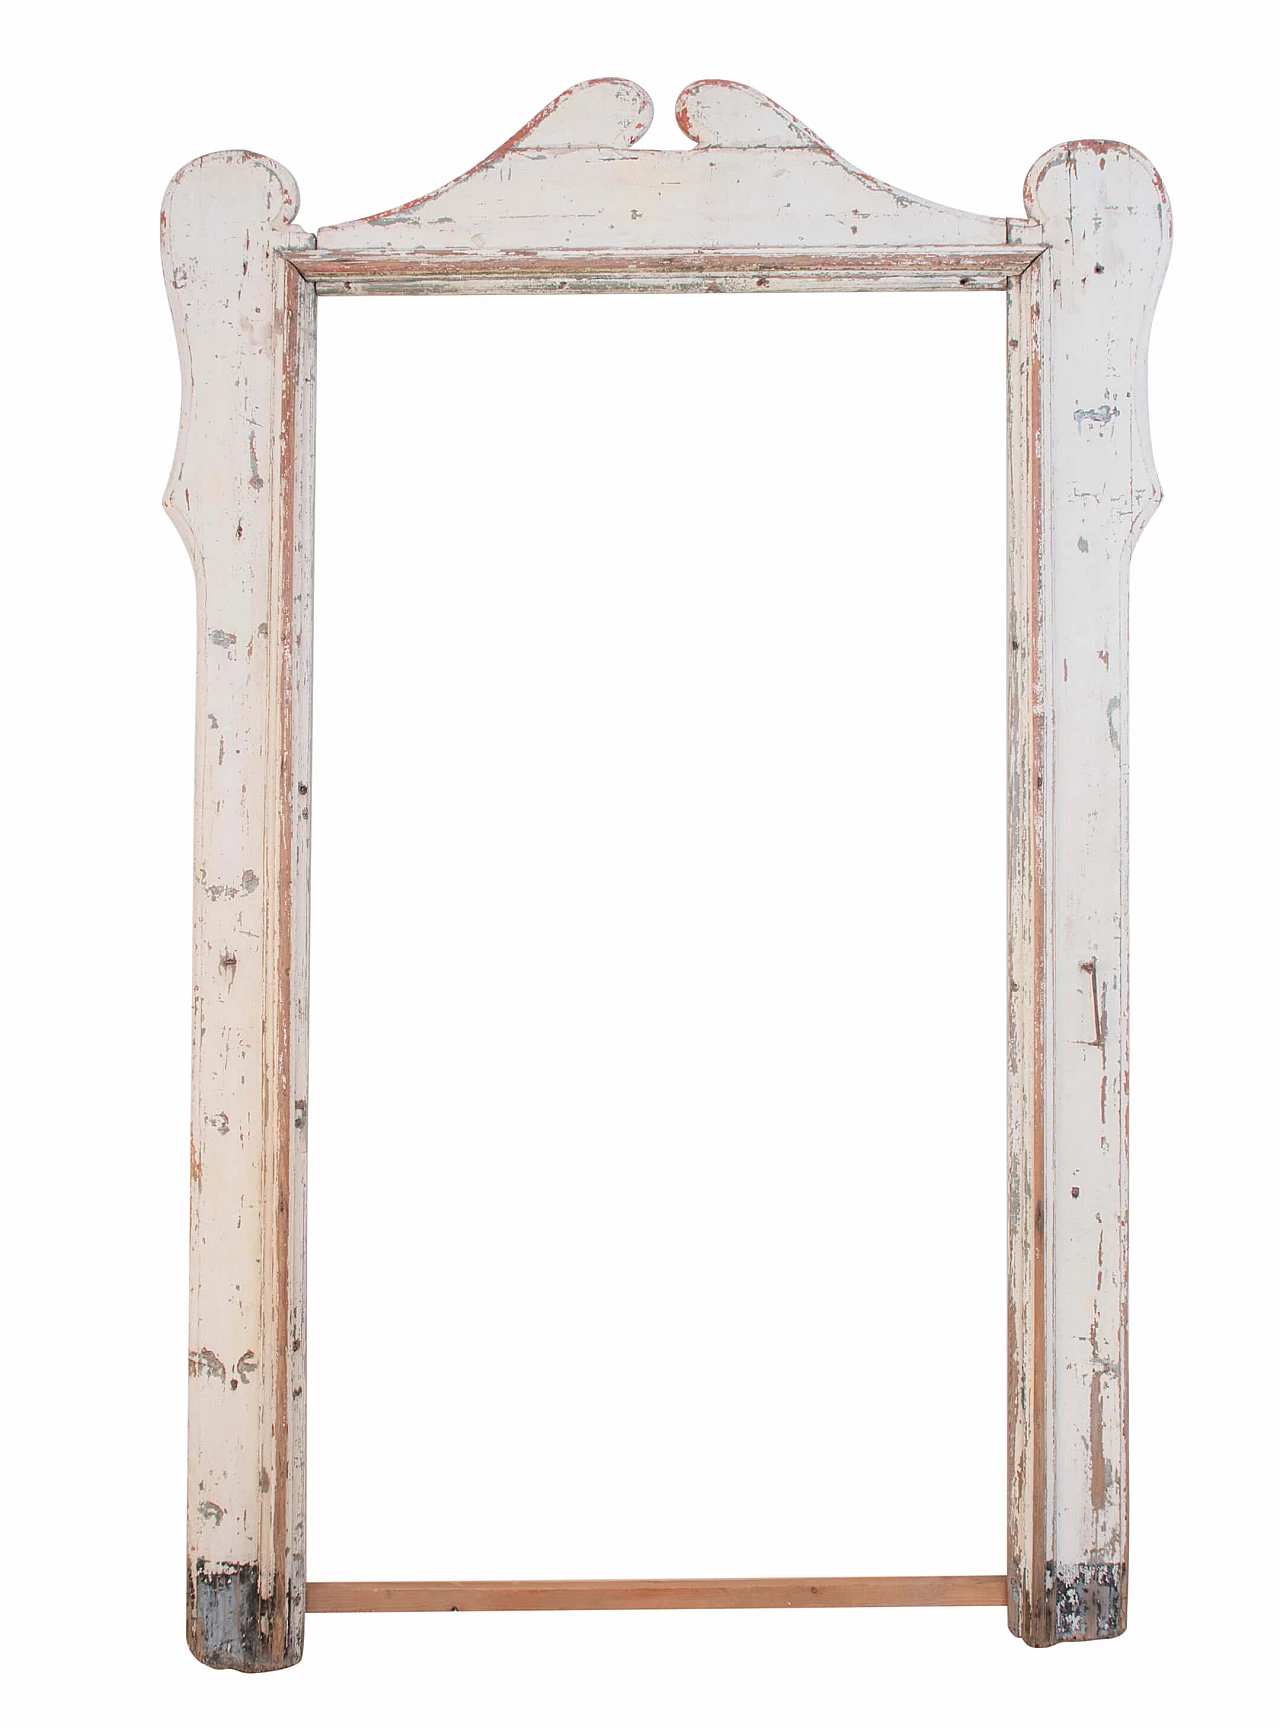 Wooden door frame painted in white, 18th century 1089211